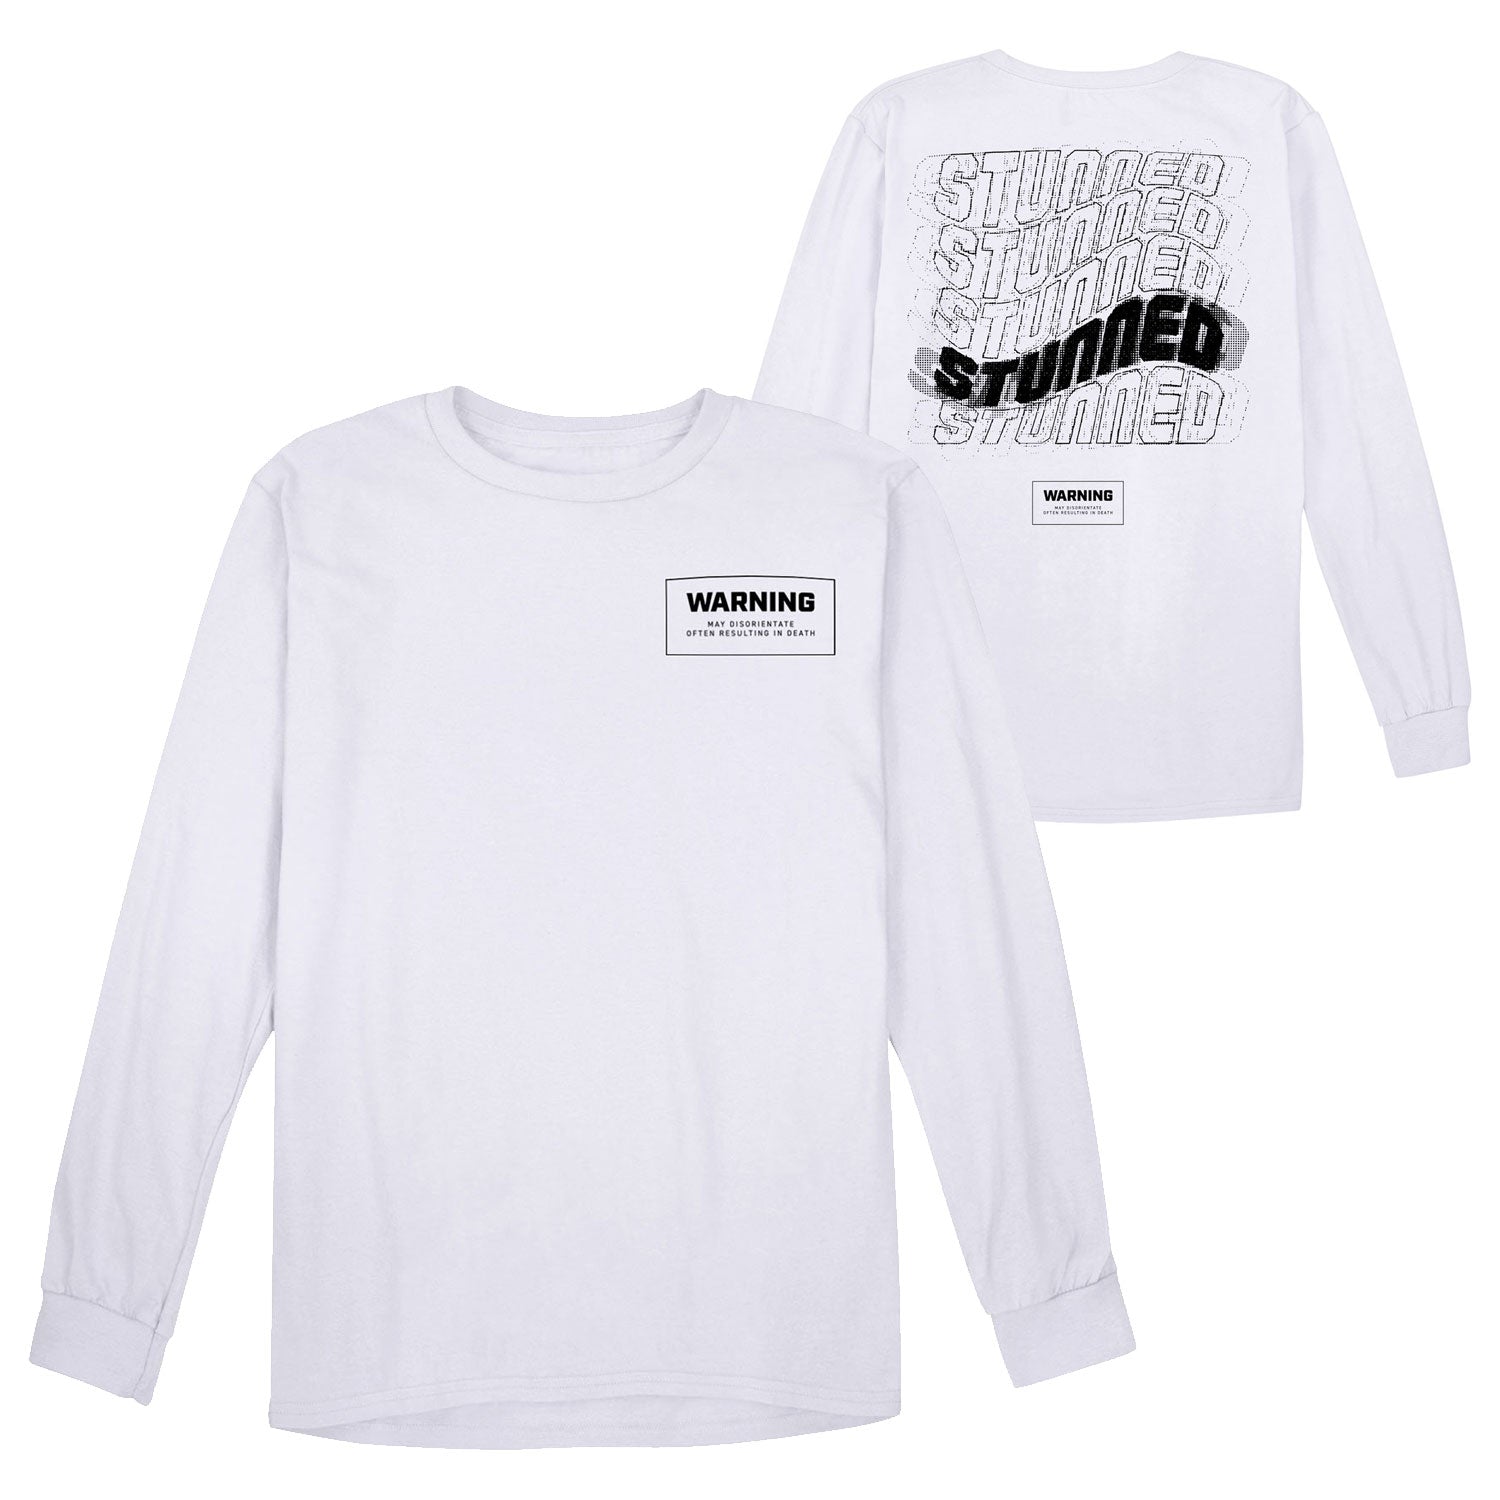 Call of Duty Stunned White Long Sleeve T-Shirt - Front and back view